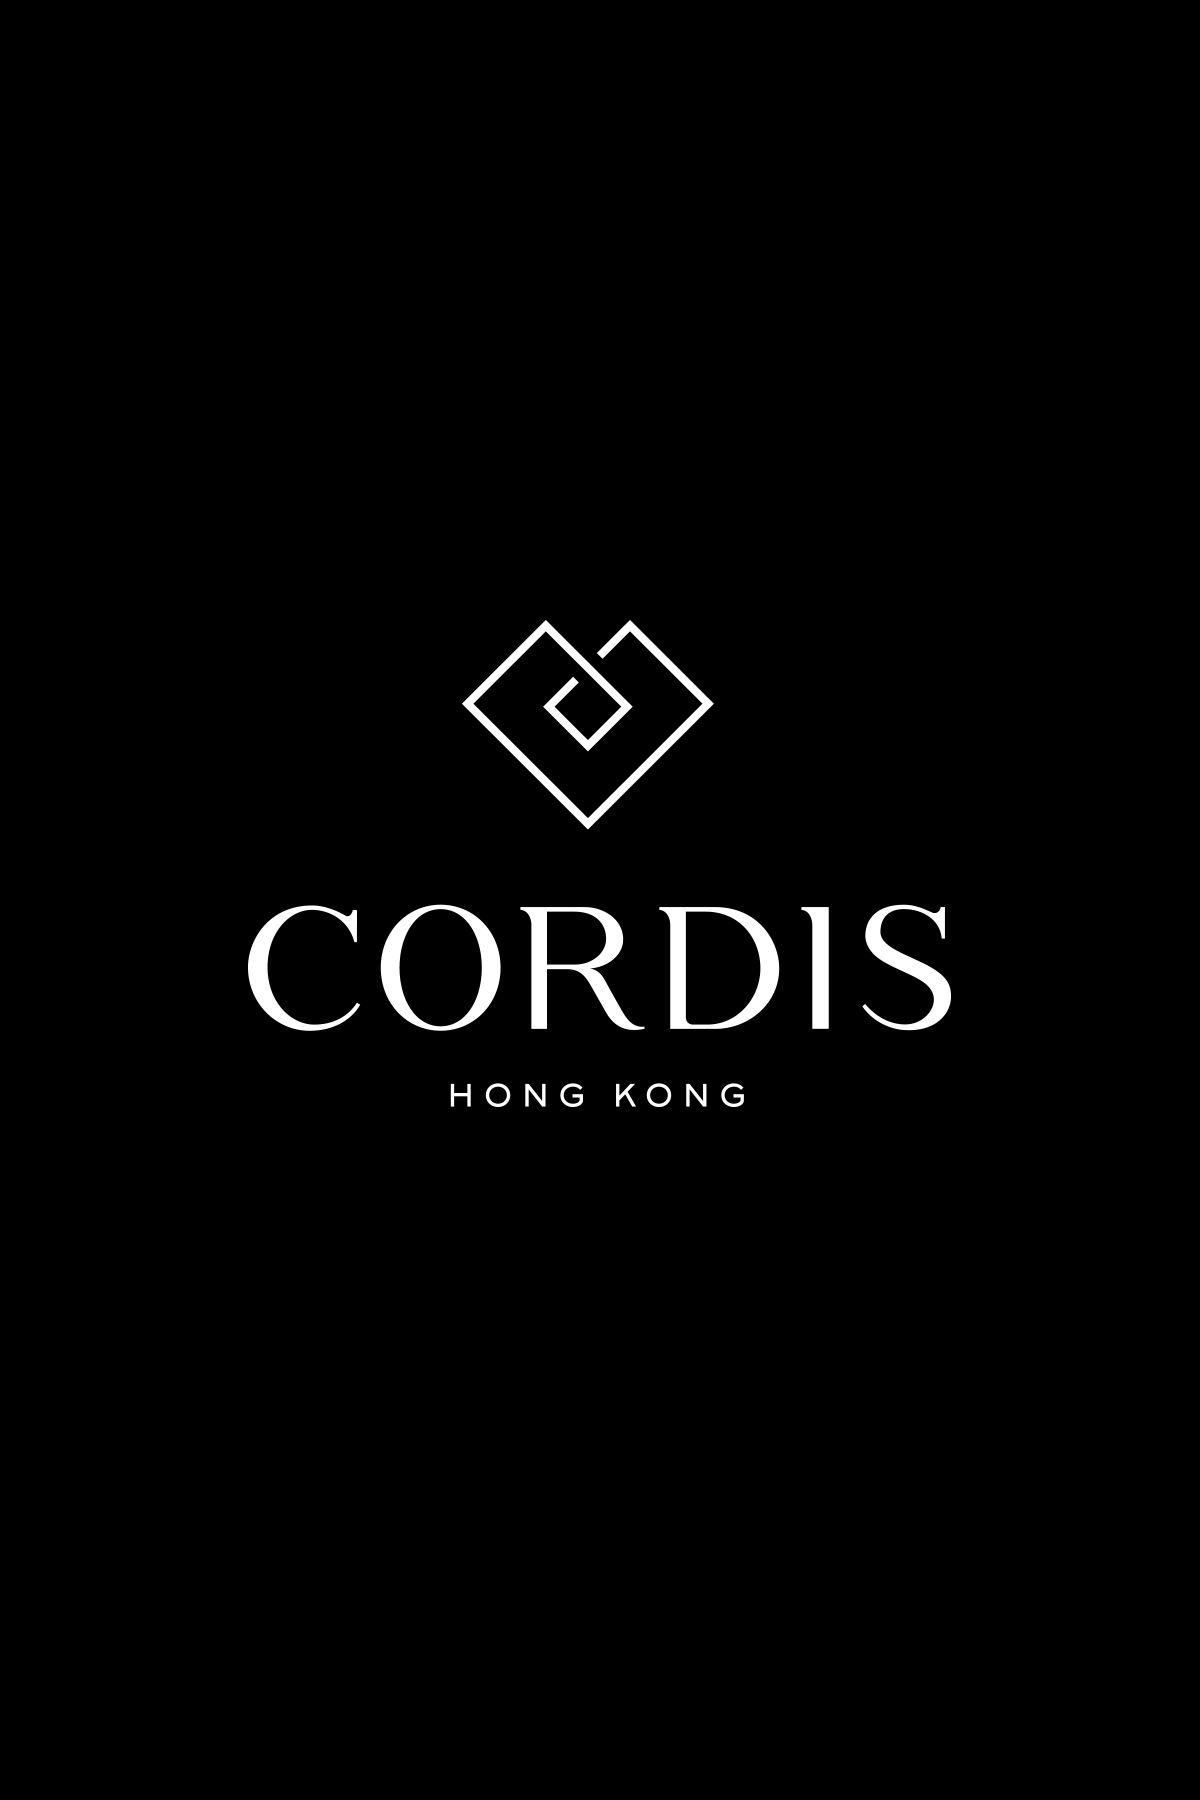 Cordis Logo - Yang Rutherford. Global branding, design and communications agency